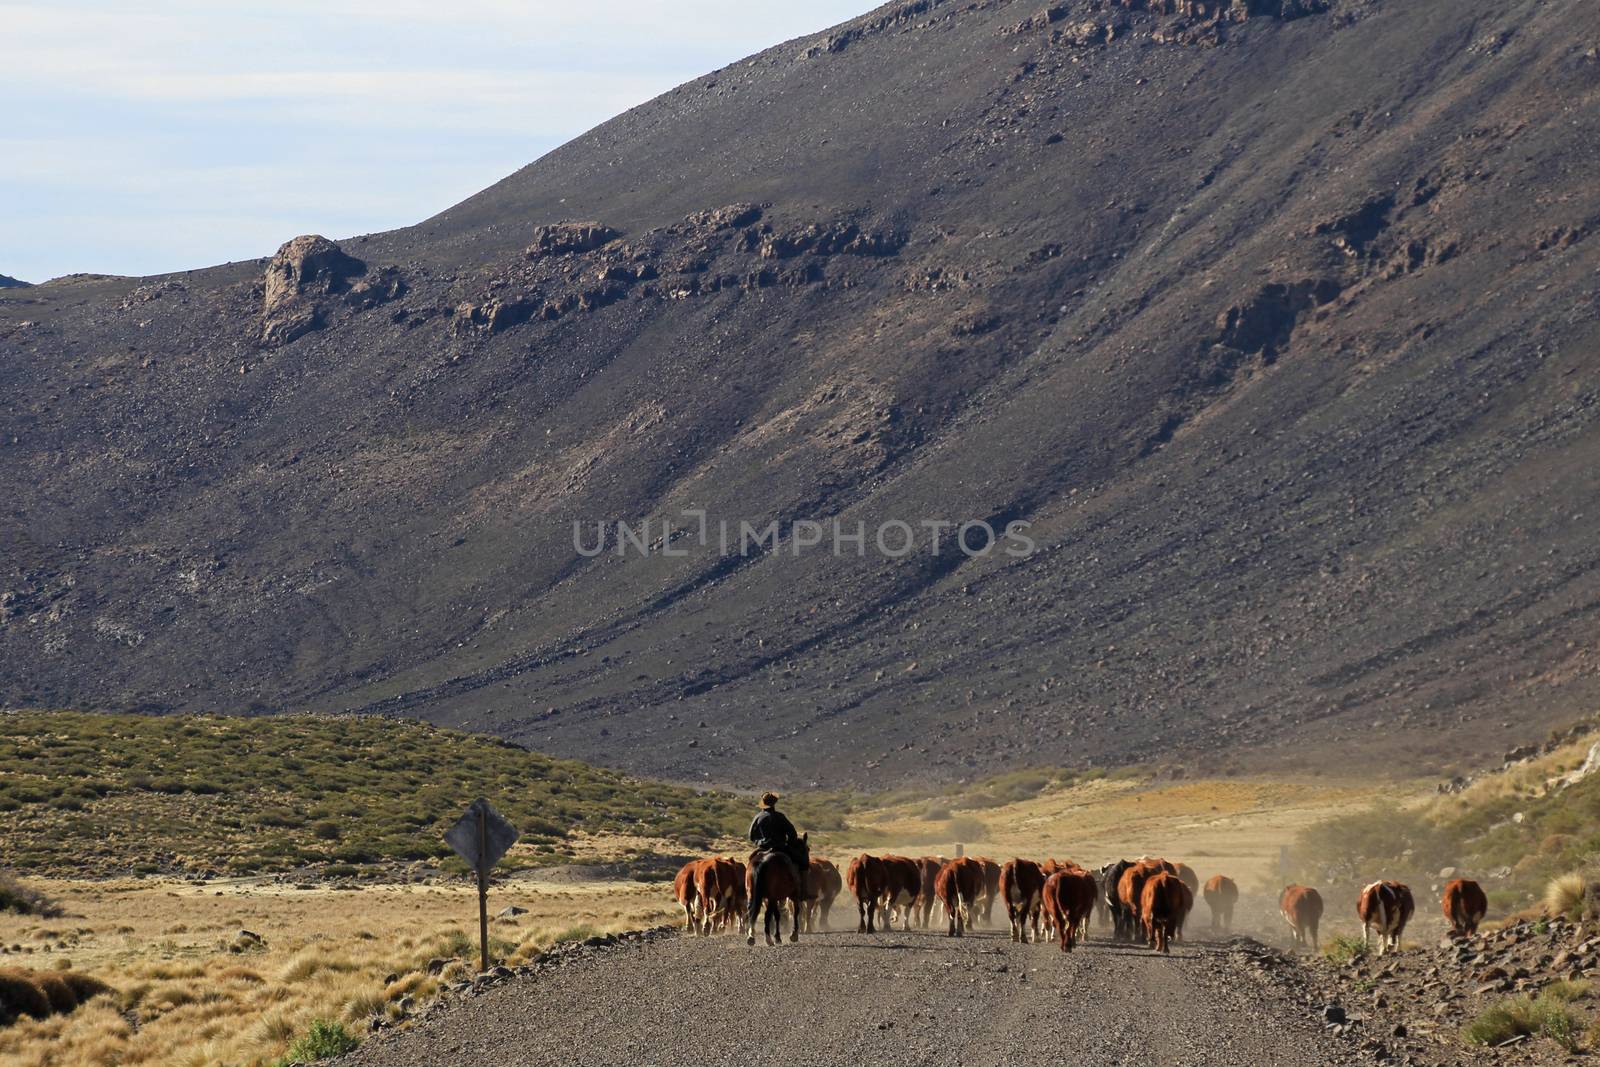 Gauchos and herd of cows in Argentina by cicloco